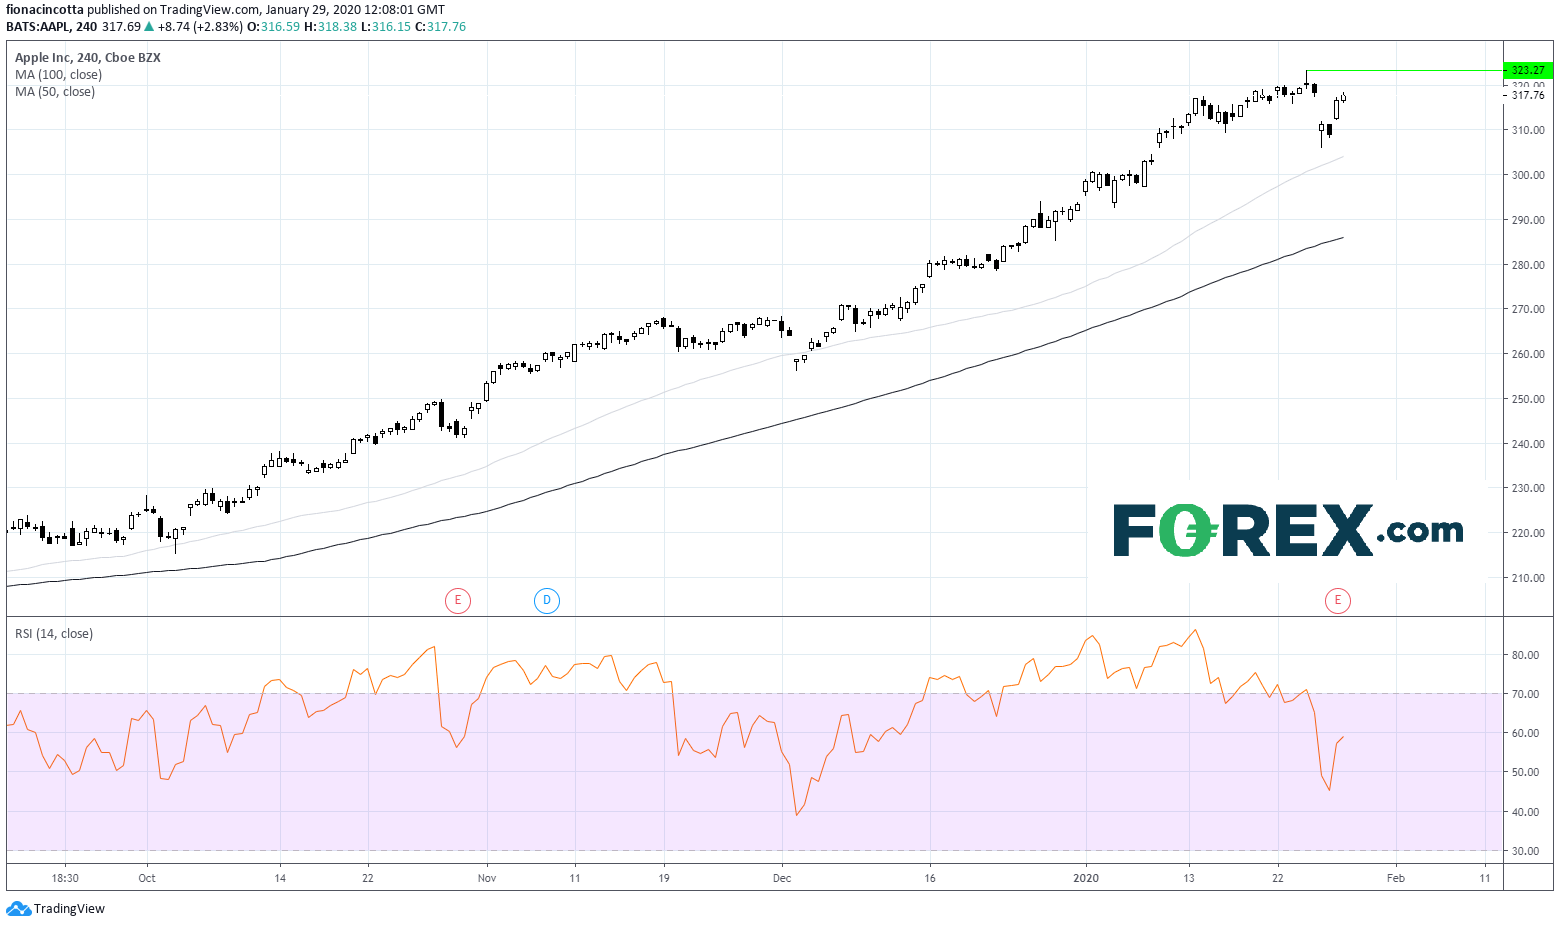 Market chart of Apple To Fresh All Time High After Stellar Q1 Earnings. Published in January 2020 by FOREX.com